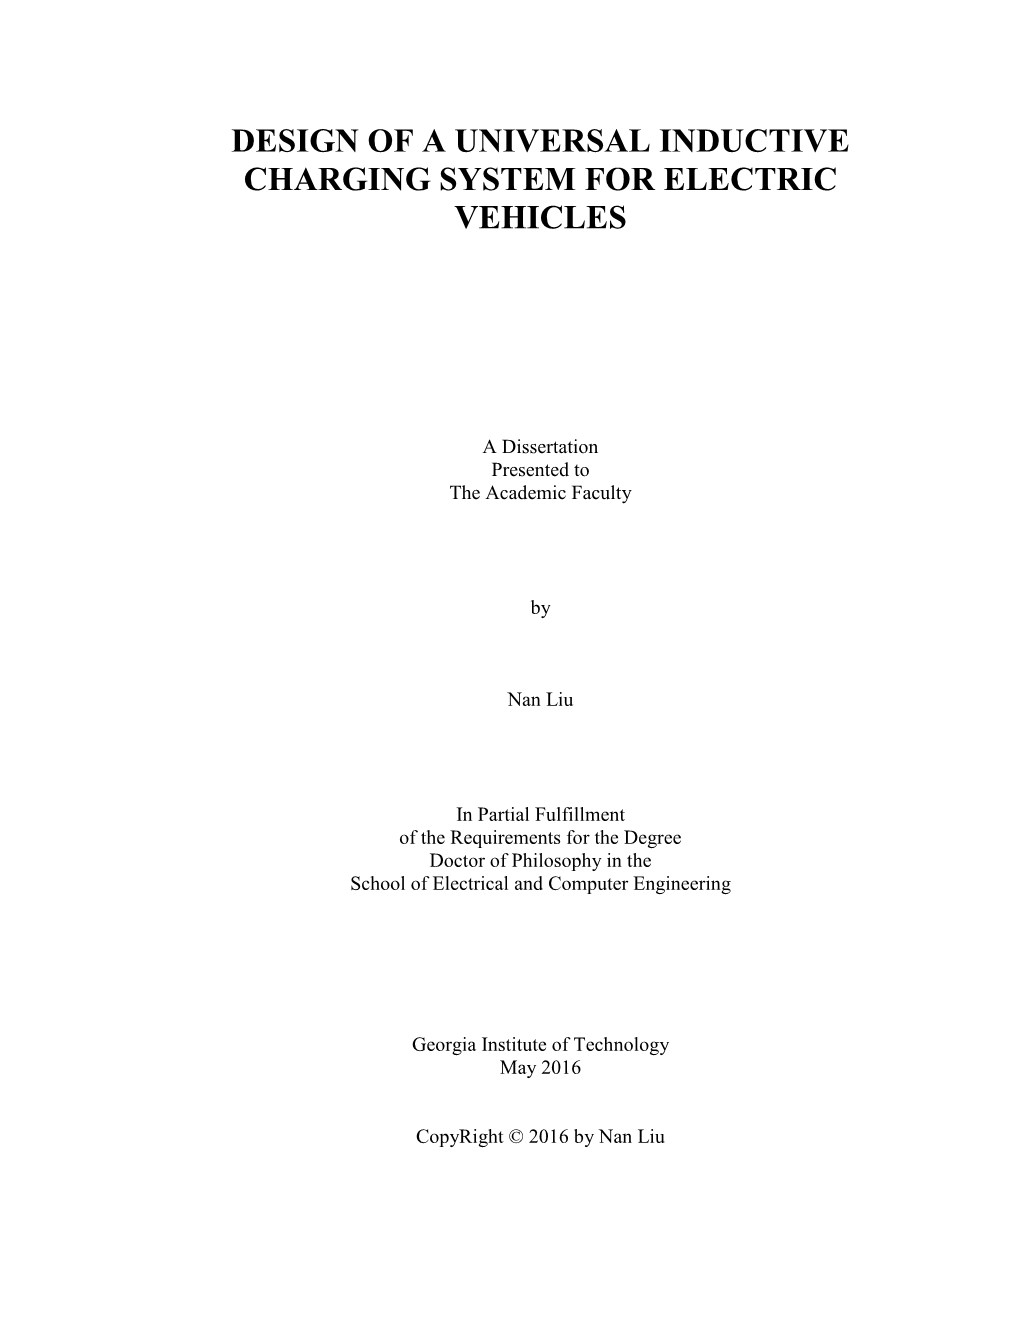 Design of a Universal Inductive Charging System for Electric Vehicles